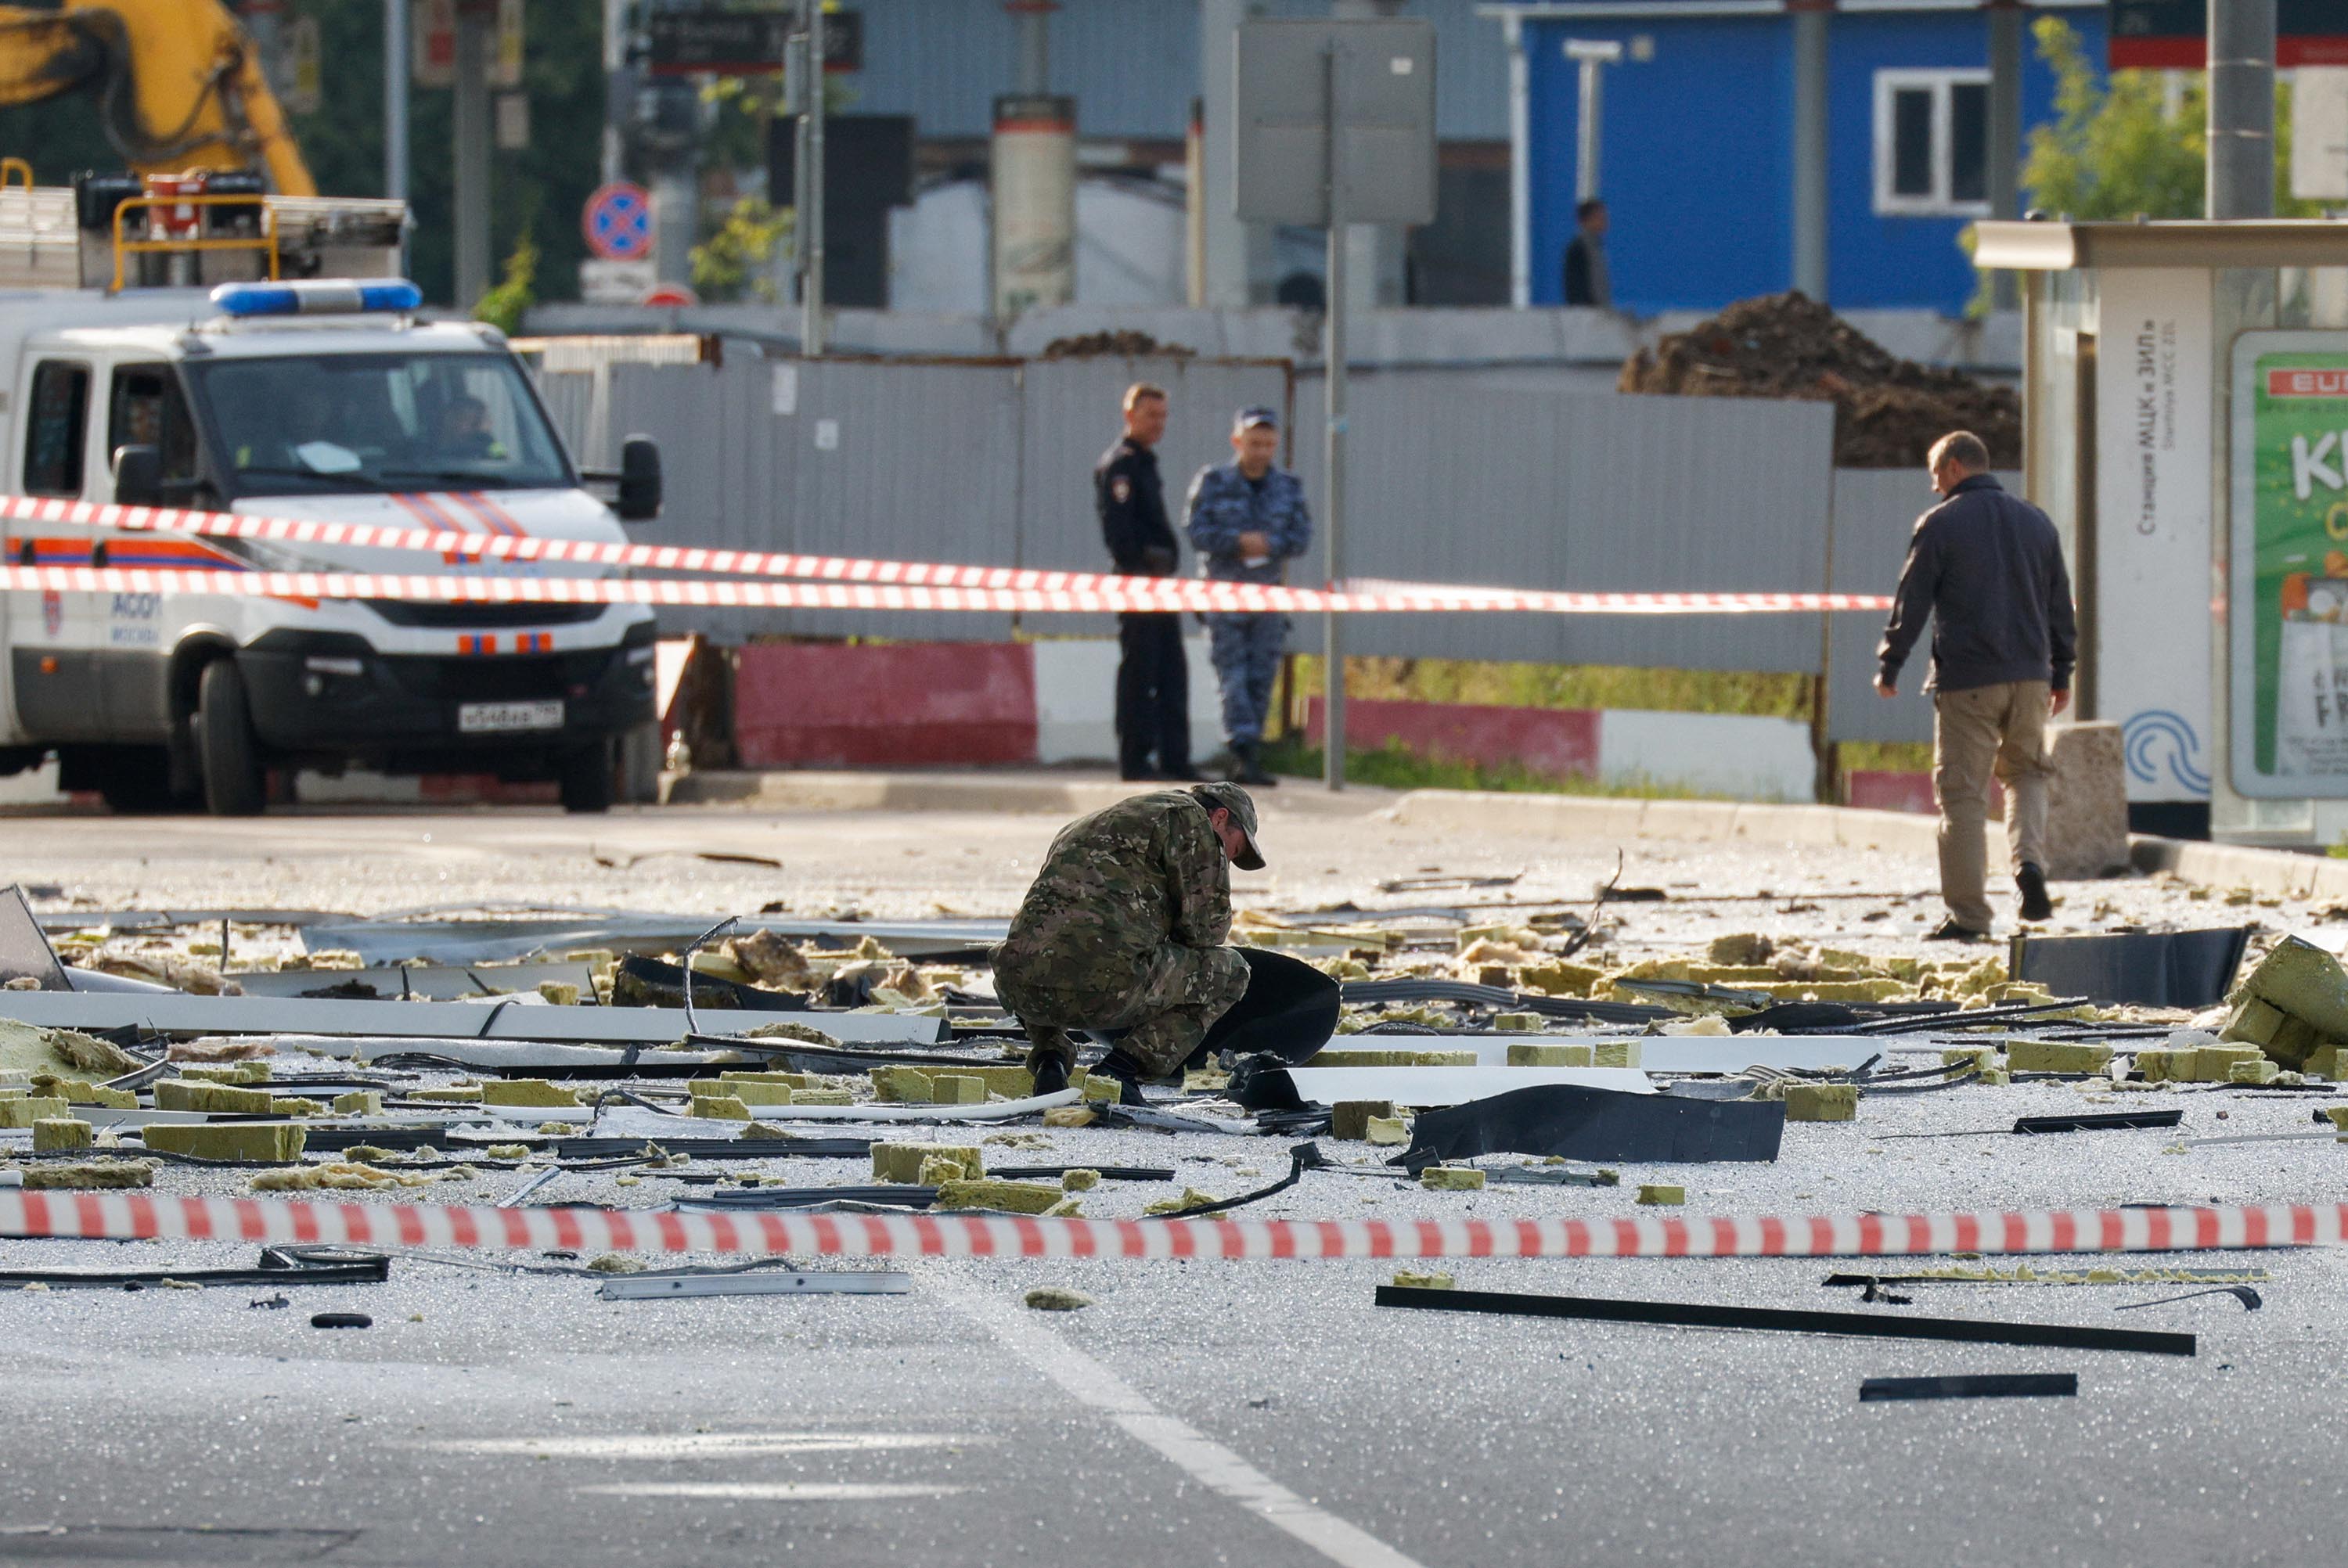 Members of the security services investigate the site of a damaged building following a reported drone attack in Moscow, Russia, on July 24.